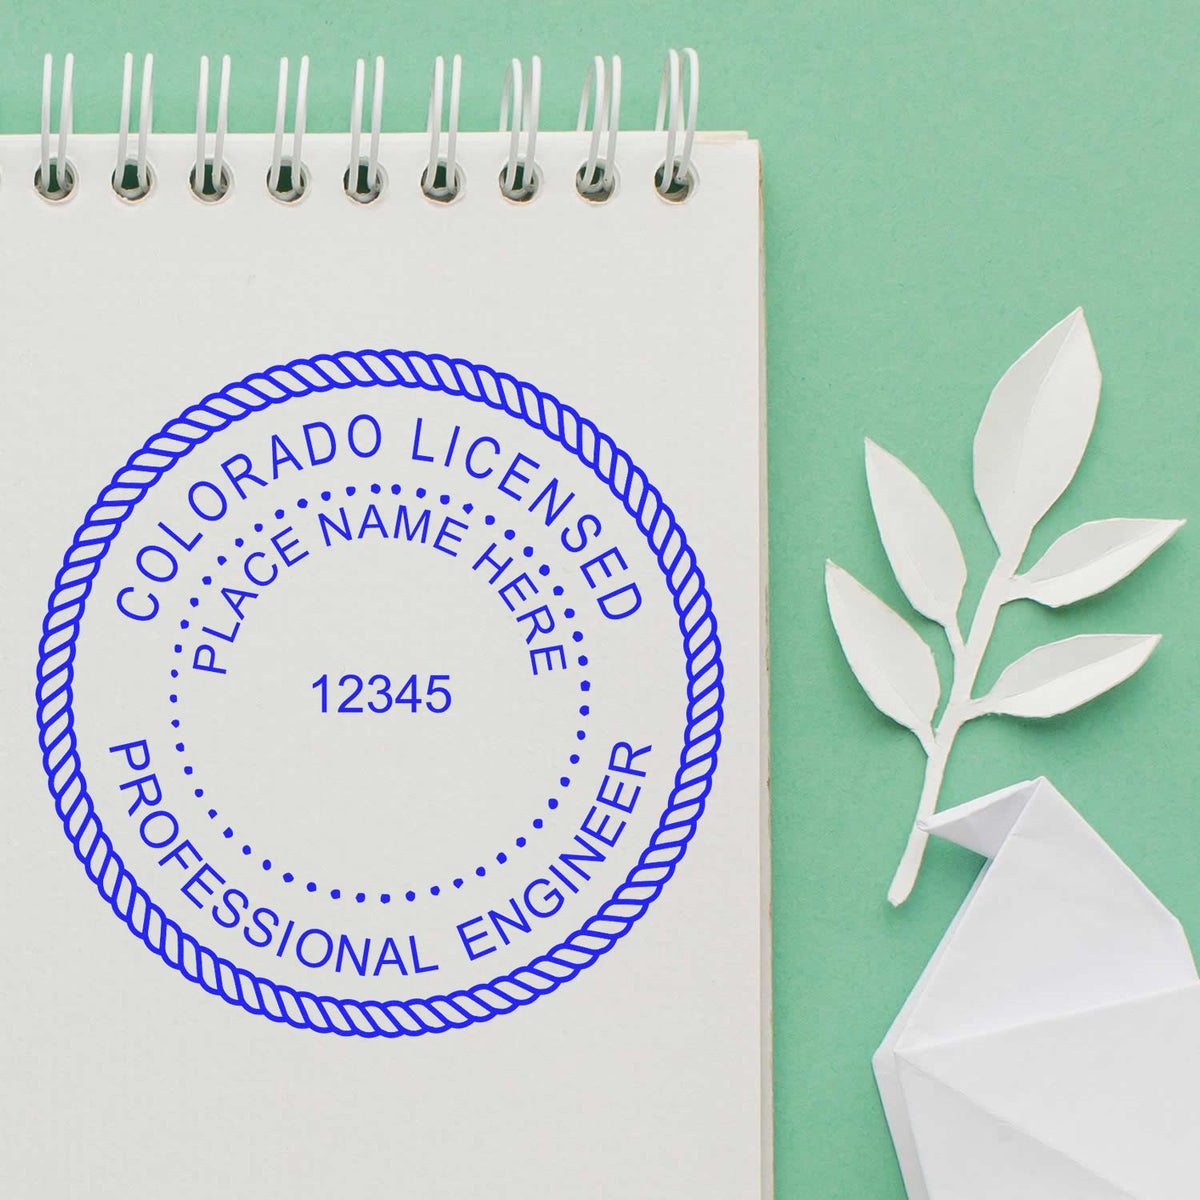 The Slim Pre-Inked Colorado Professional Engineer Seal Stamp stamp impression comes to life with a crisp, detailed photo on paper - showcasing true professional quality.